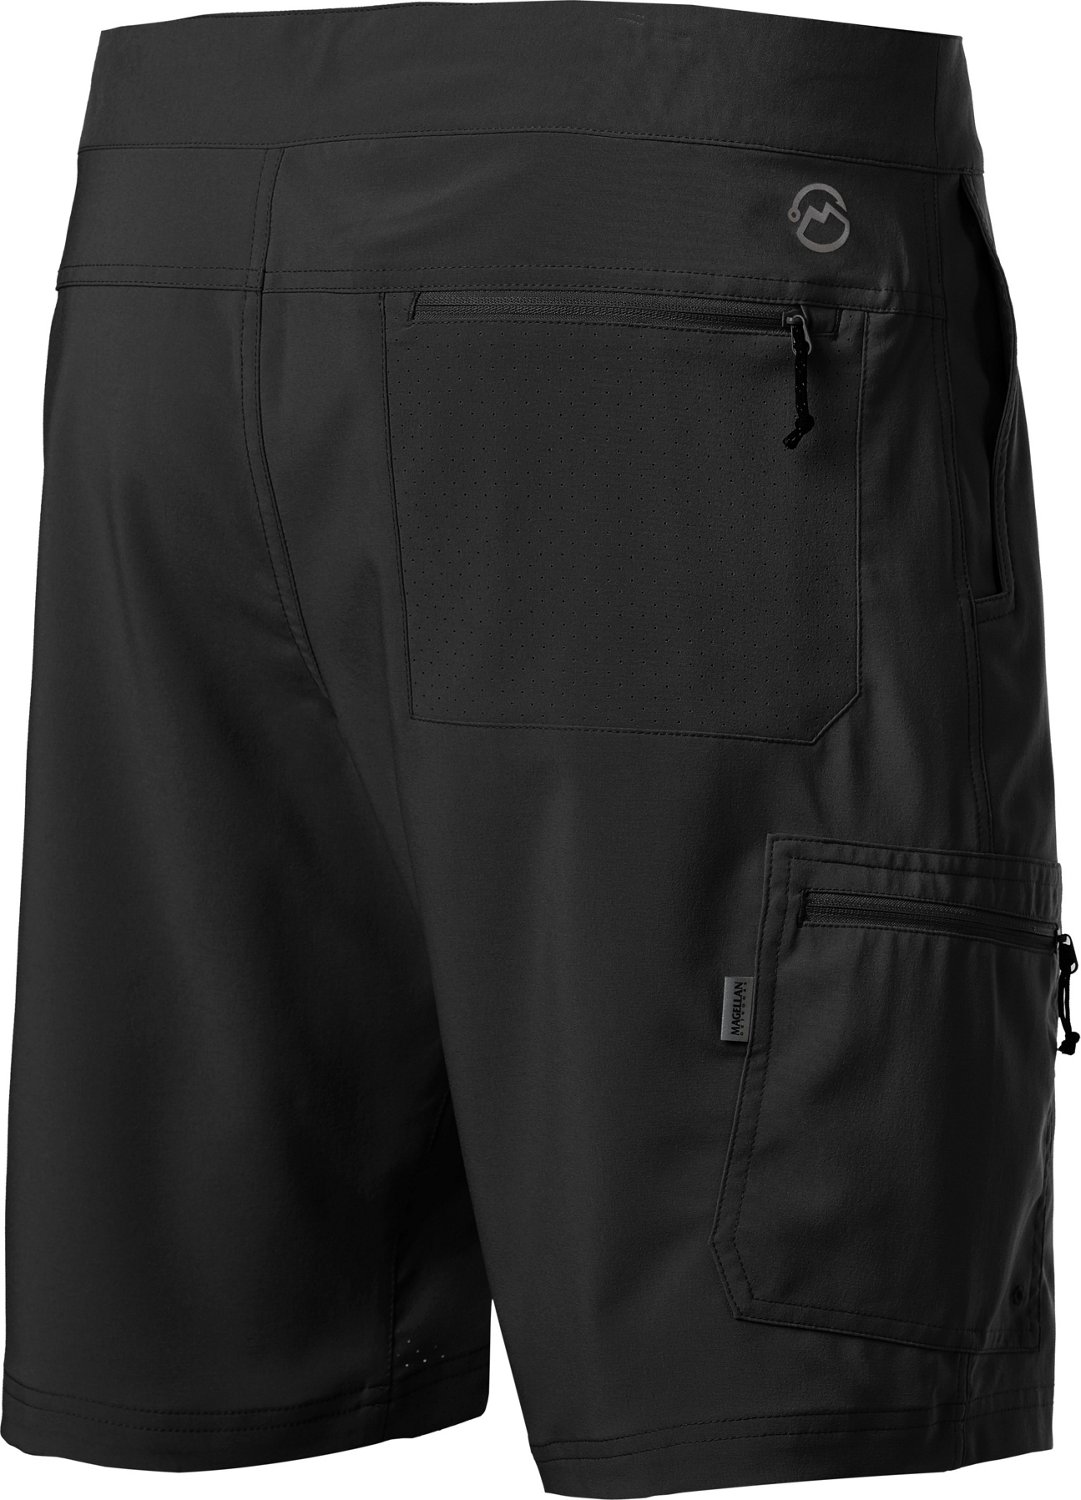 Magellan Fishing Cargo Shorts Men's Relaxed Fit Water Repellent Fish Gear  Short